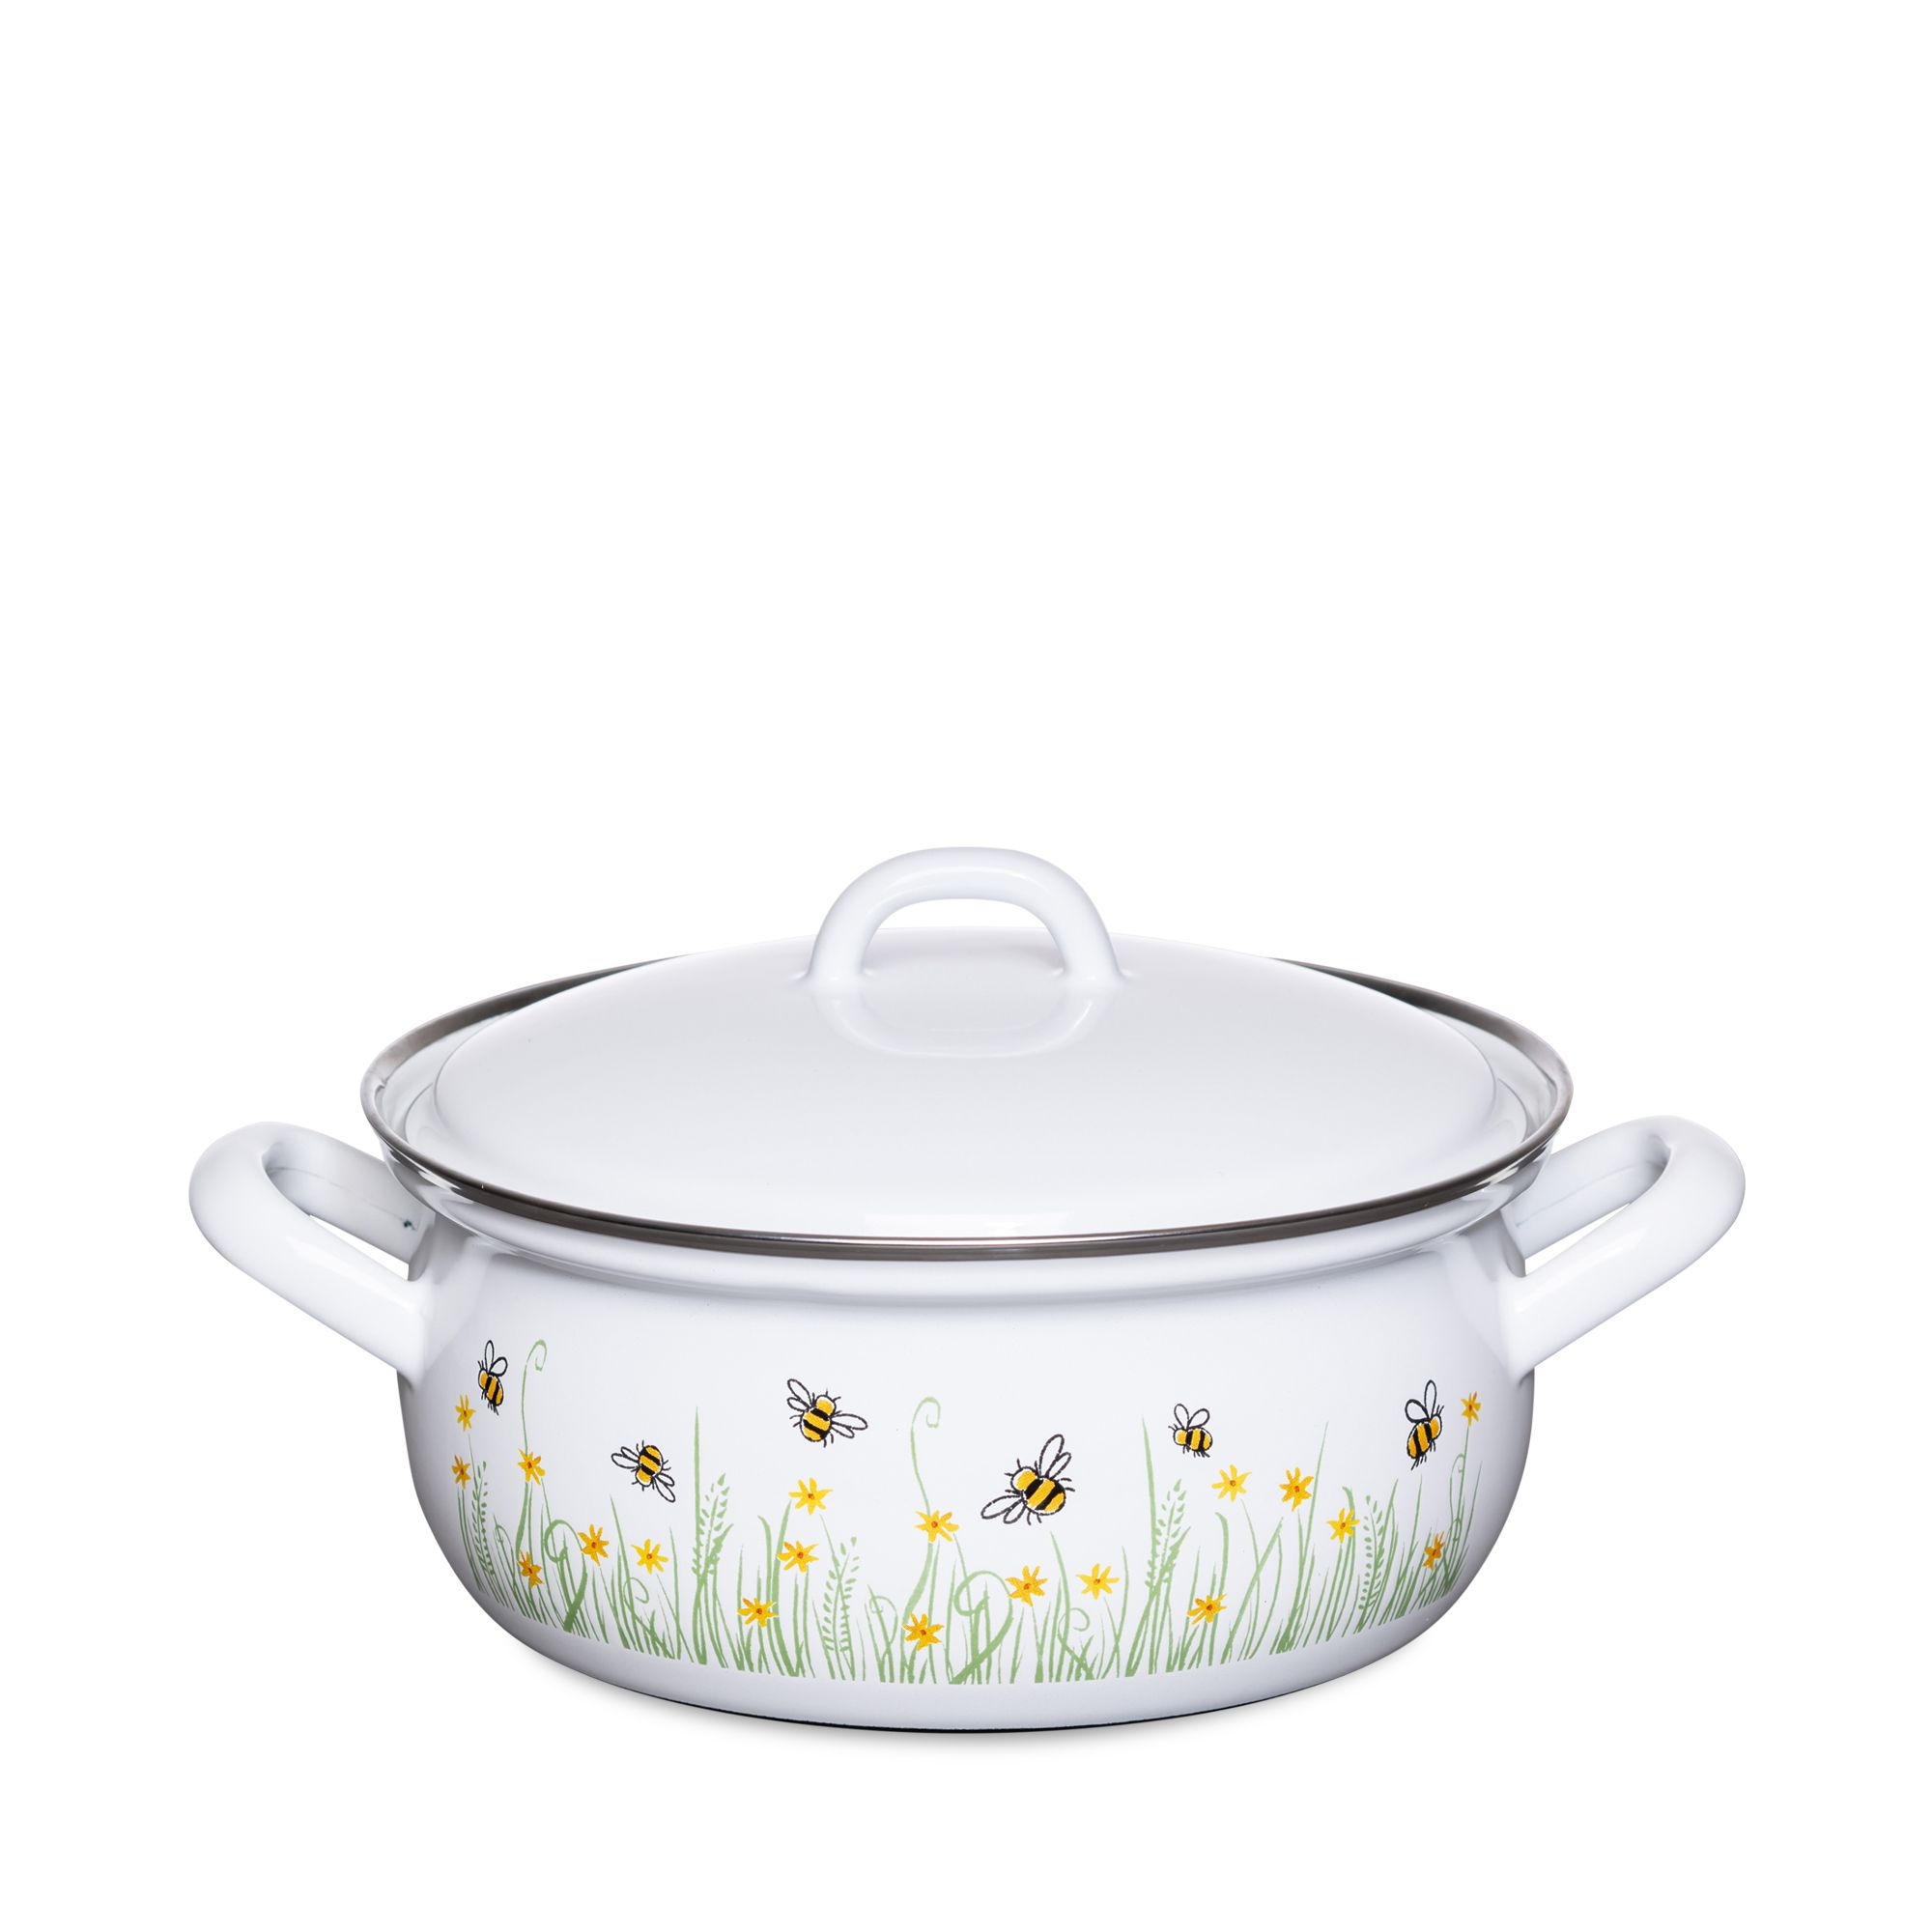 Riess COUNTRY - Bee - casserole dish with lid 18 cm